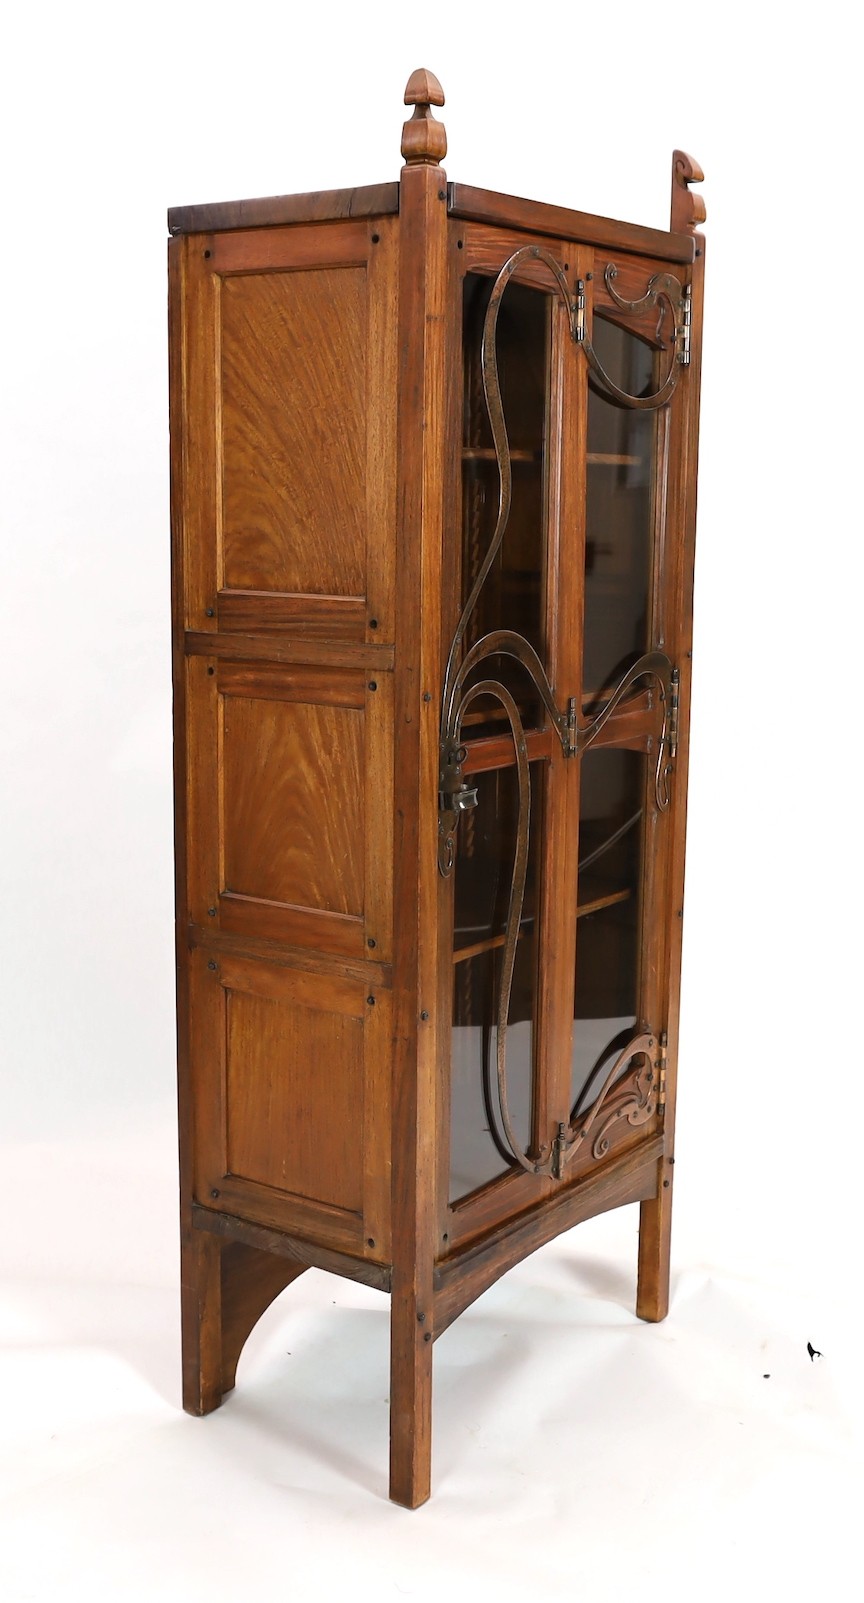 Gustave Serrurier-Bovy (Belgian 1858–1910). An Art Nouveau copper mounted red narra wood vitrine, - Image 5 of 6